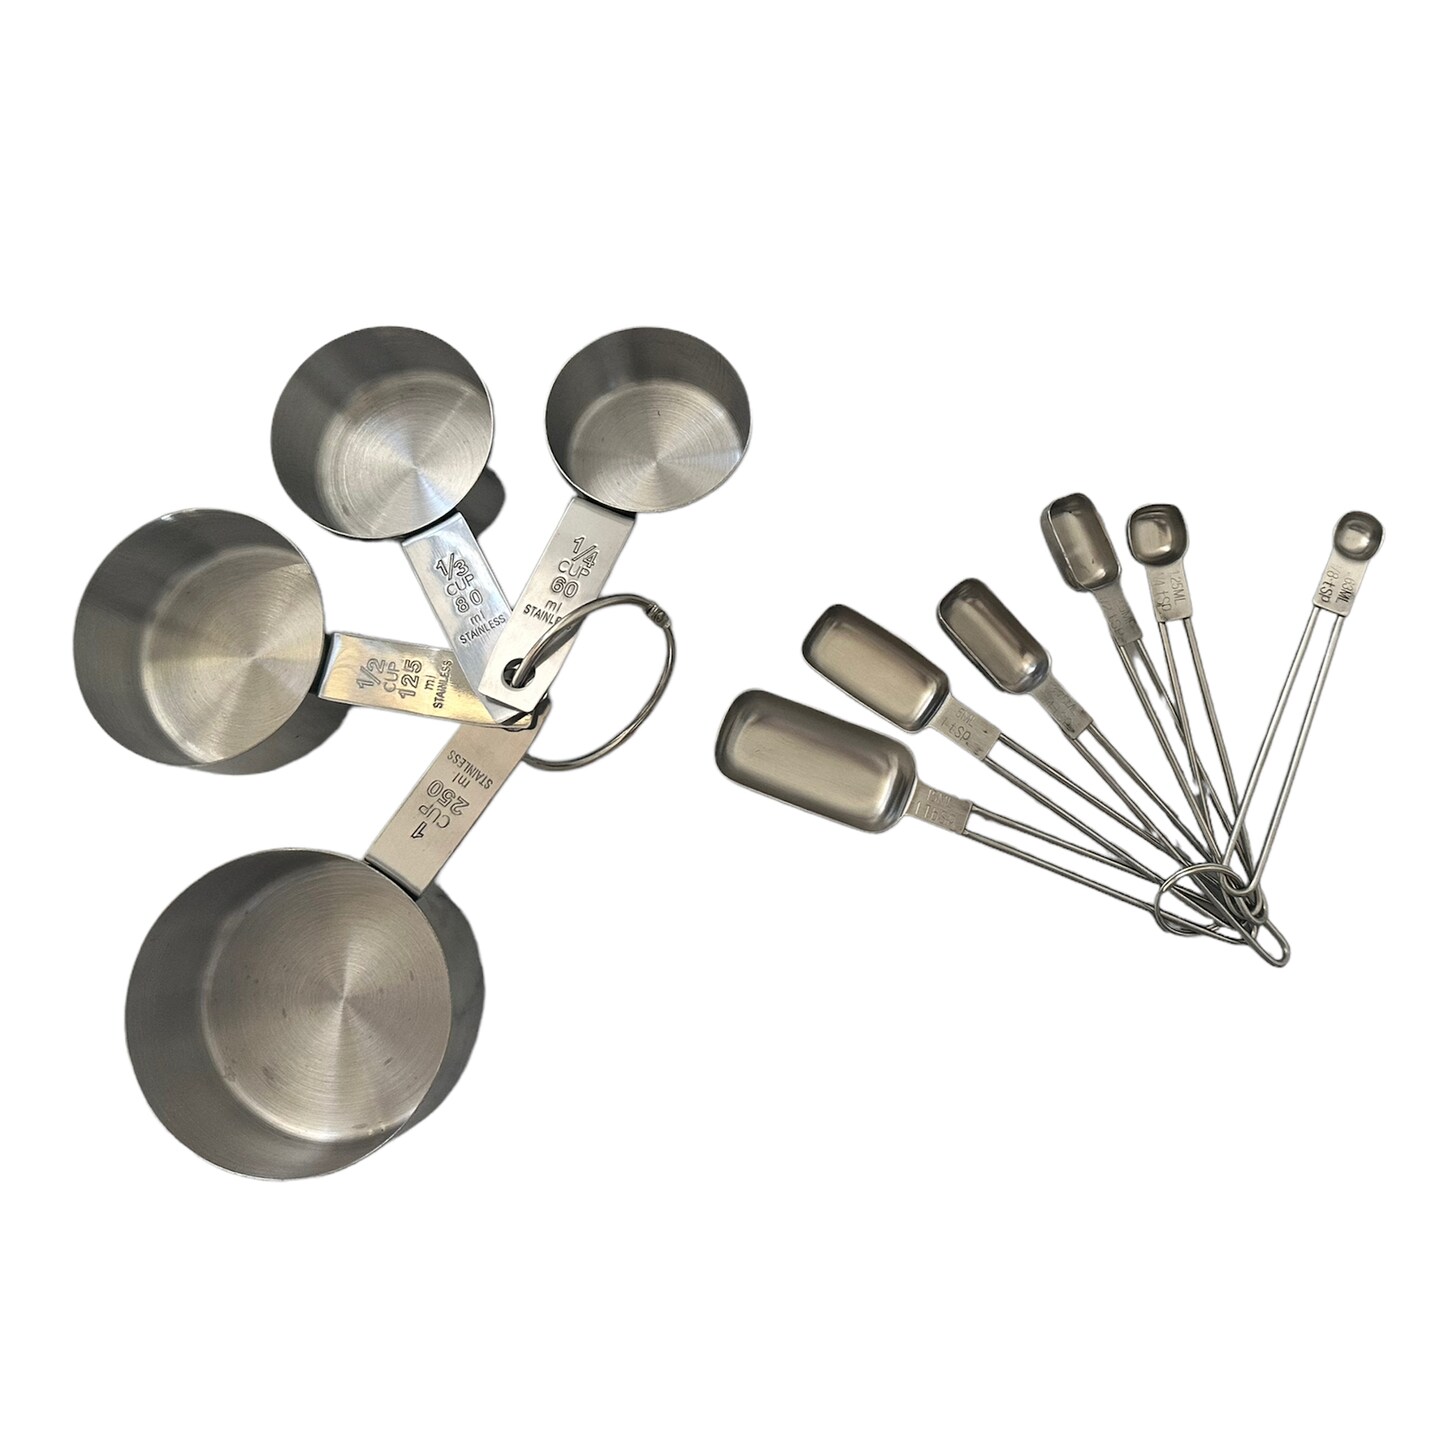 Set of 10 Stainless Steel Measuring Cup and Spoon Set